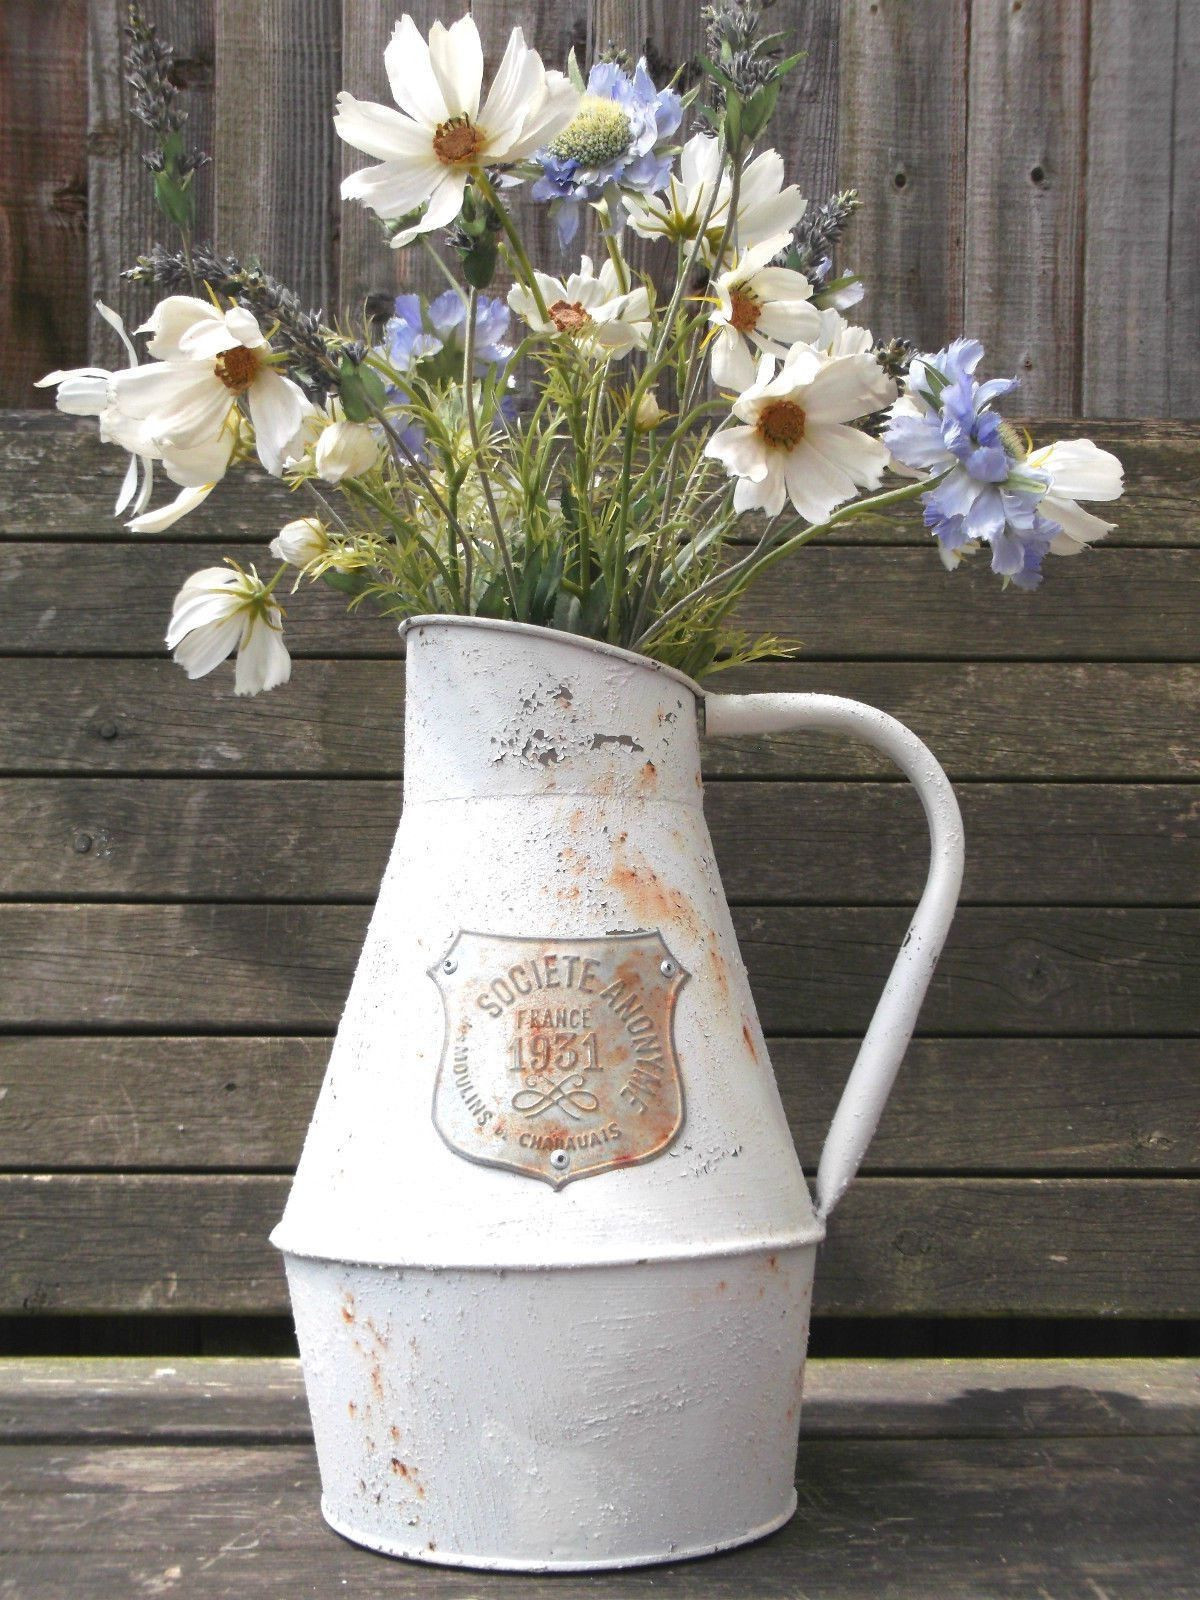 15 Lovely Art Deco Vase 2024 free download art deco vase of 30 copper flower vase the weekly world with regard to french flower bucket h vases galvanized french vase tin bucketi 0d